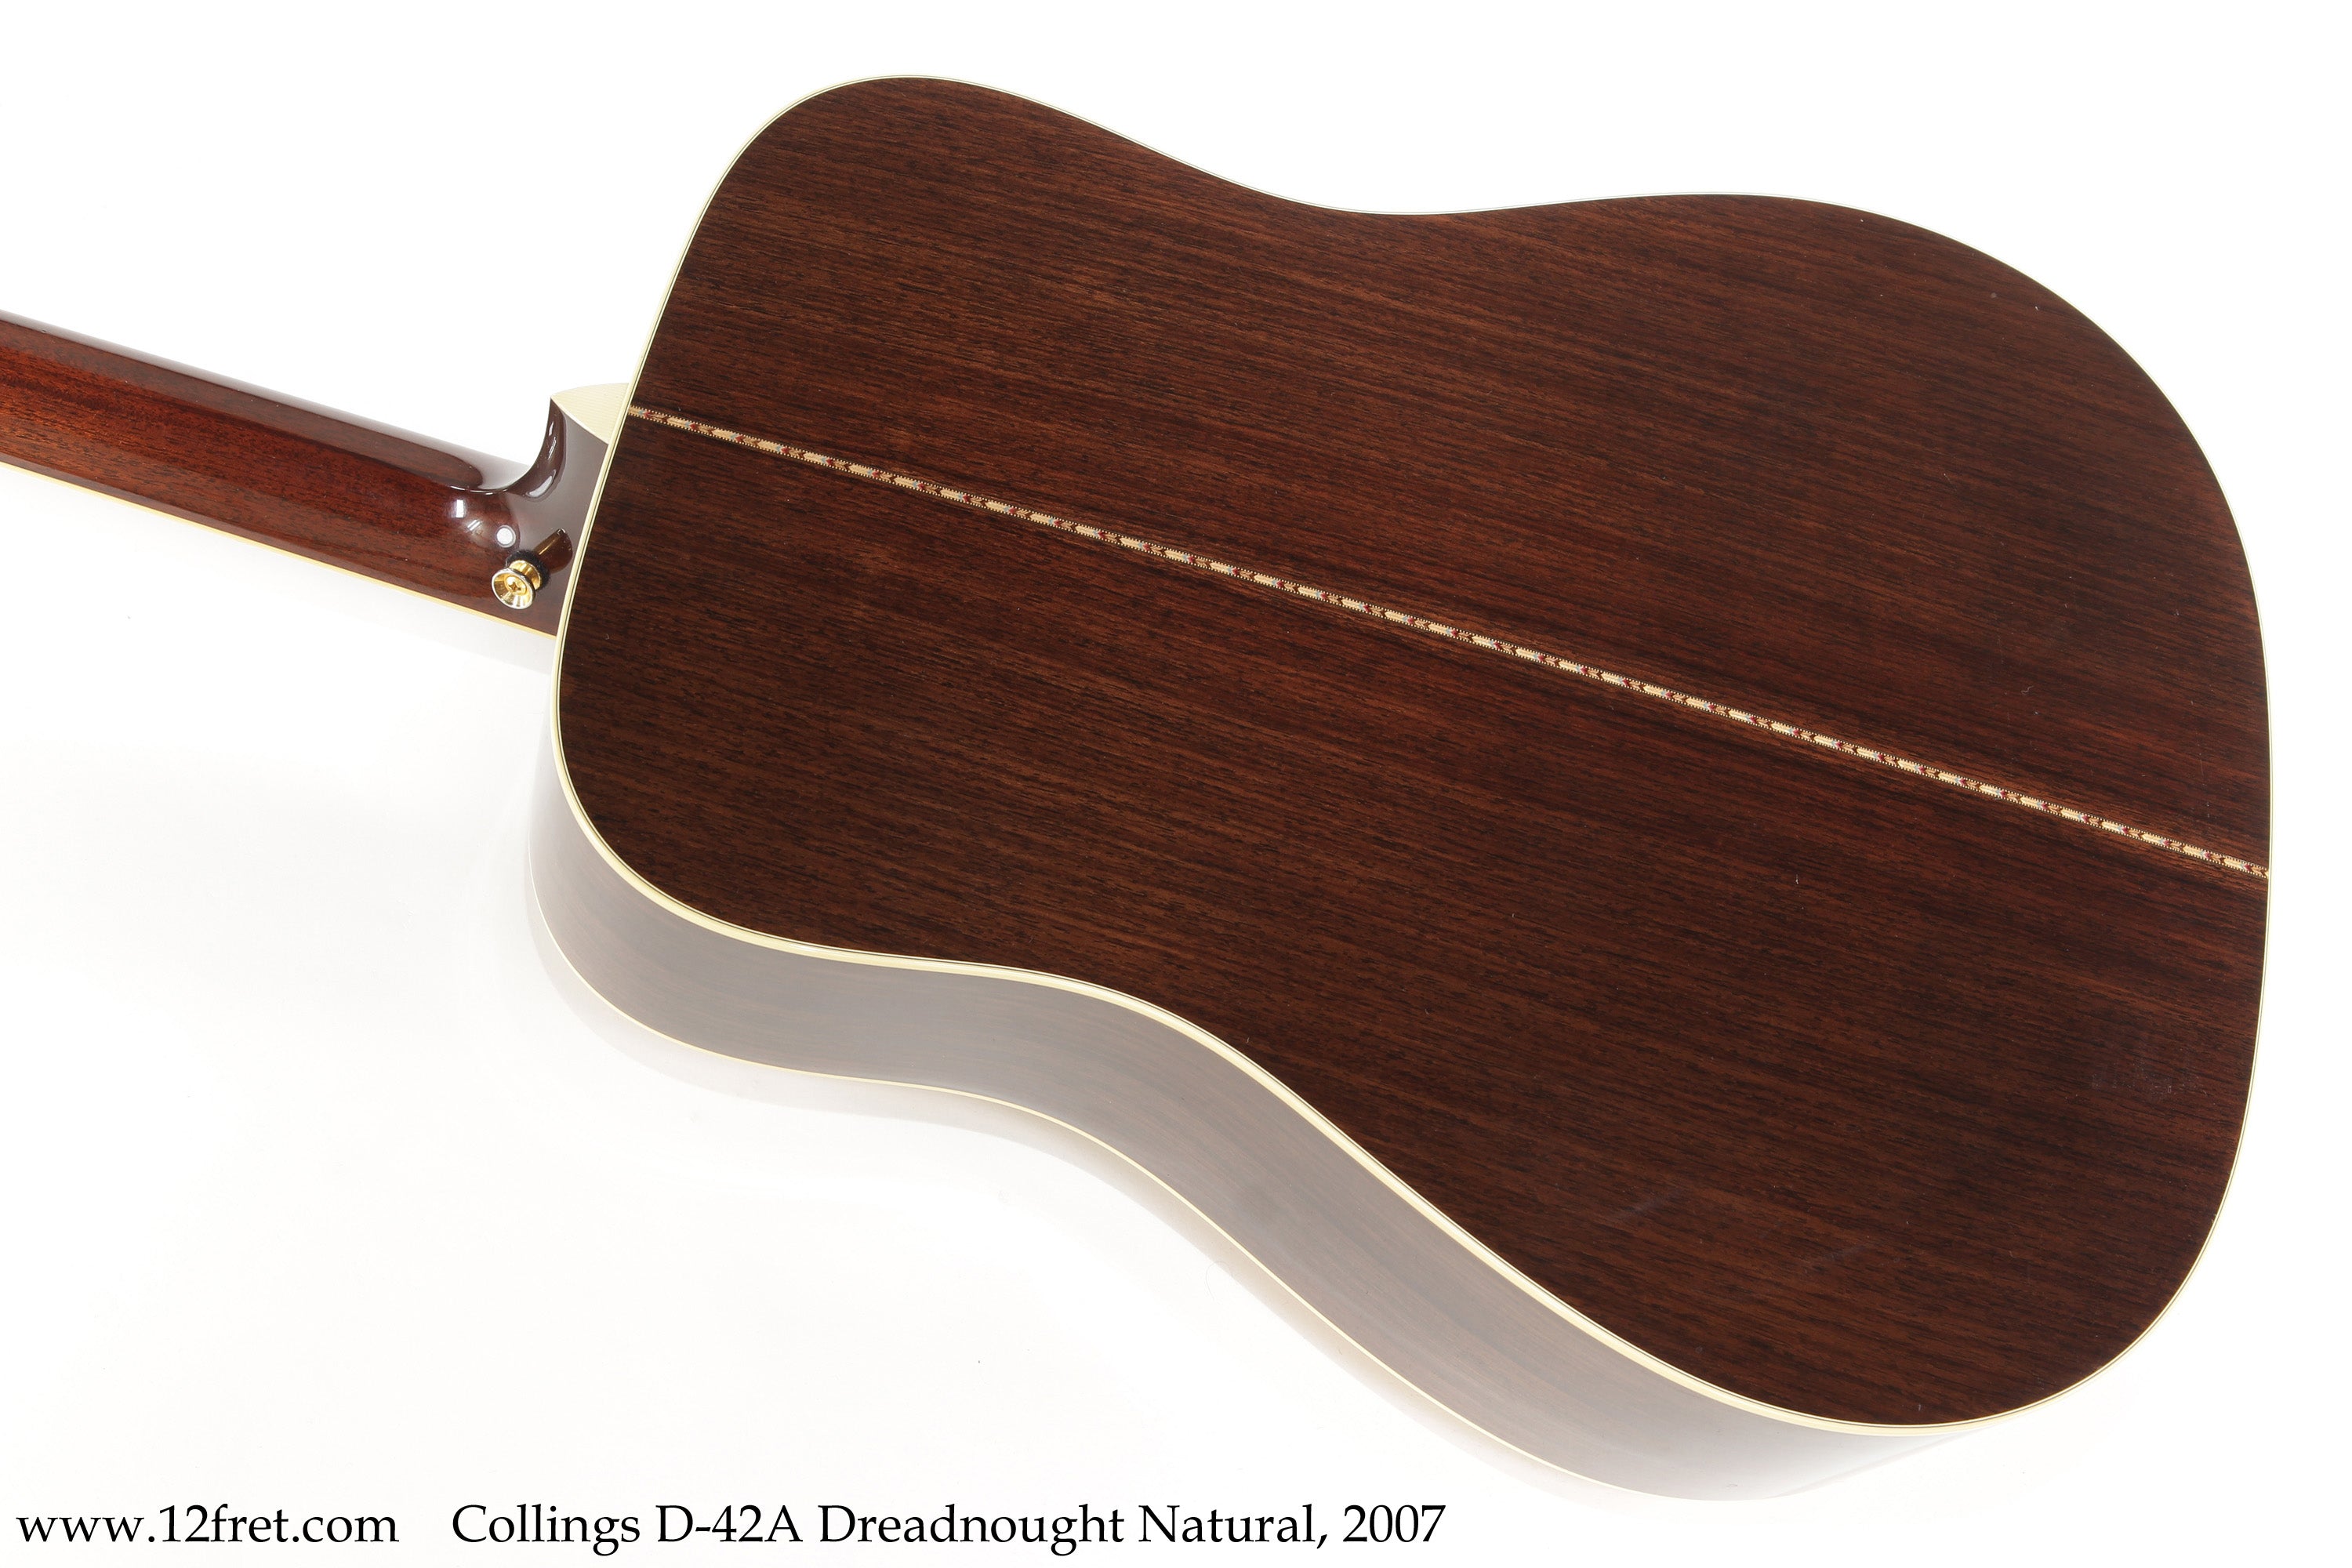 Collings D-42A Dreadnought Natural, 2007